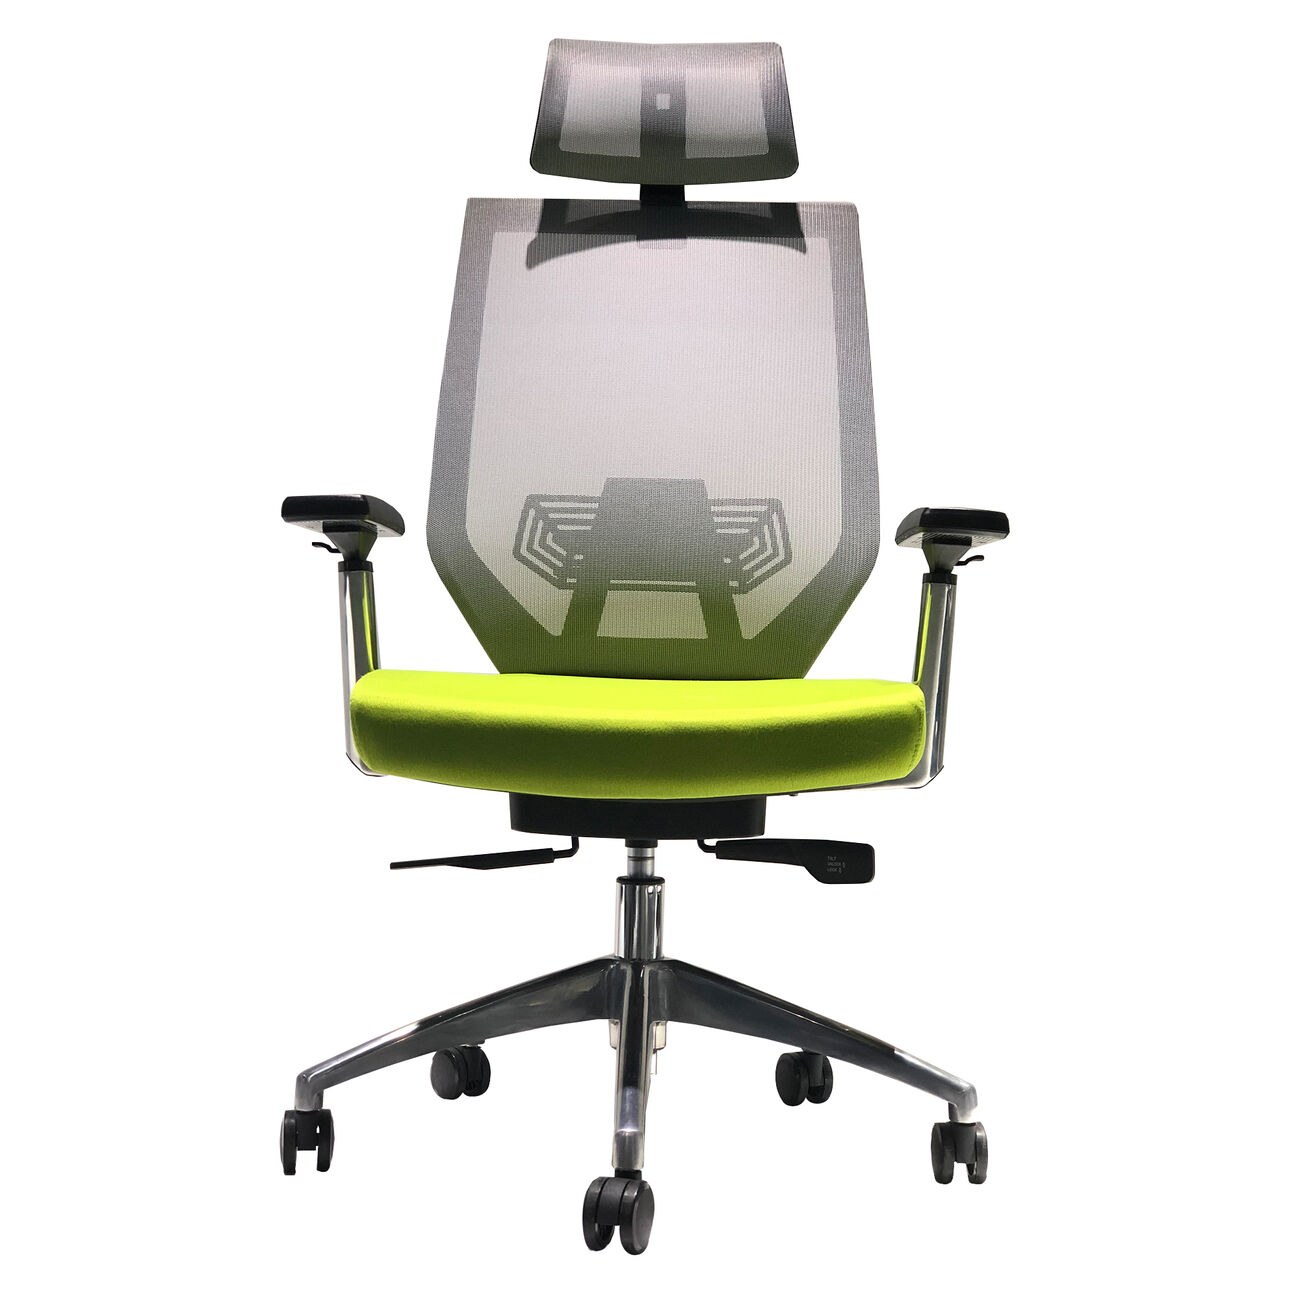 Adjustable Headrest Ergonomic Office Swivel Chair with Padded Seat and Casters, Green and Gray